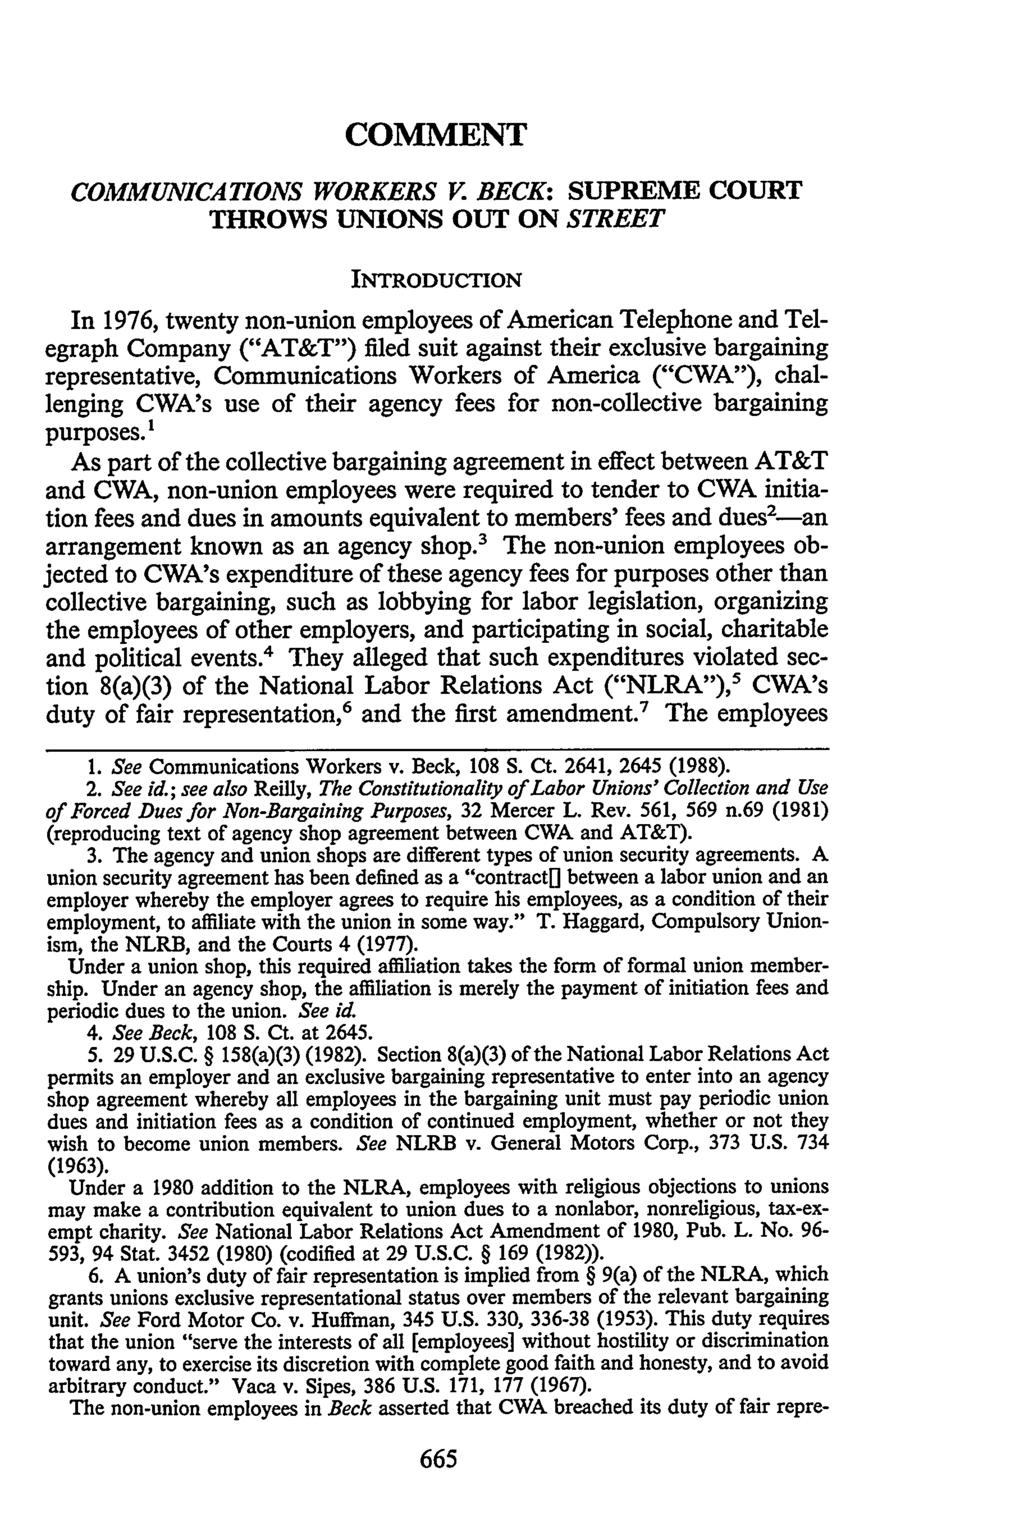 COMMENT COMMUNICATIONS WORKERS V BECK: SUPREME COURT THROWS UNIONS OUT ON STREET INTRODUCTION In 1976, twenty non-union employees of American Telephone and Telegraph Company ("AT&T") filed suit